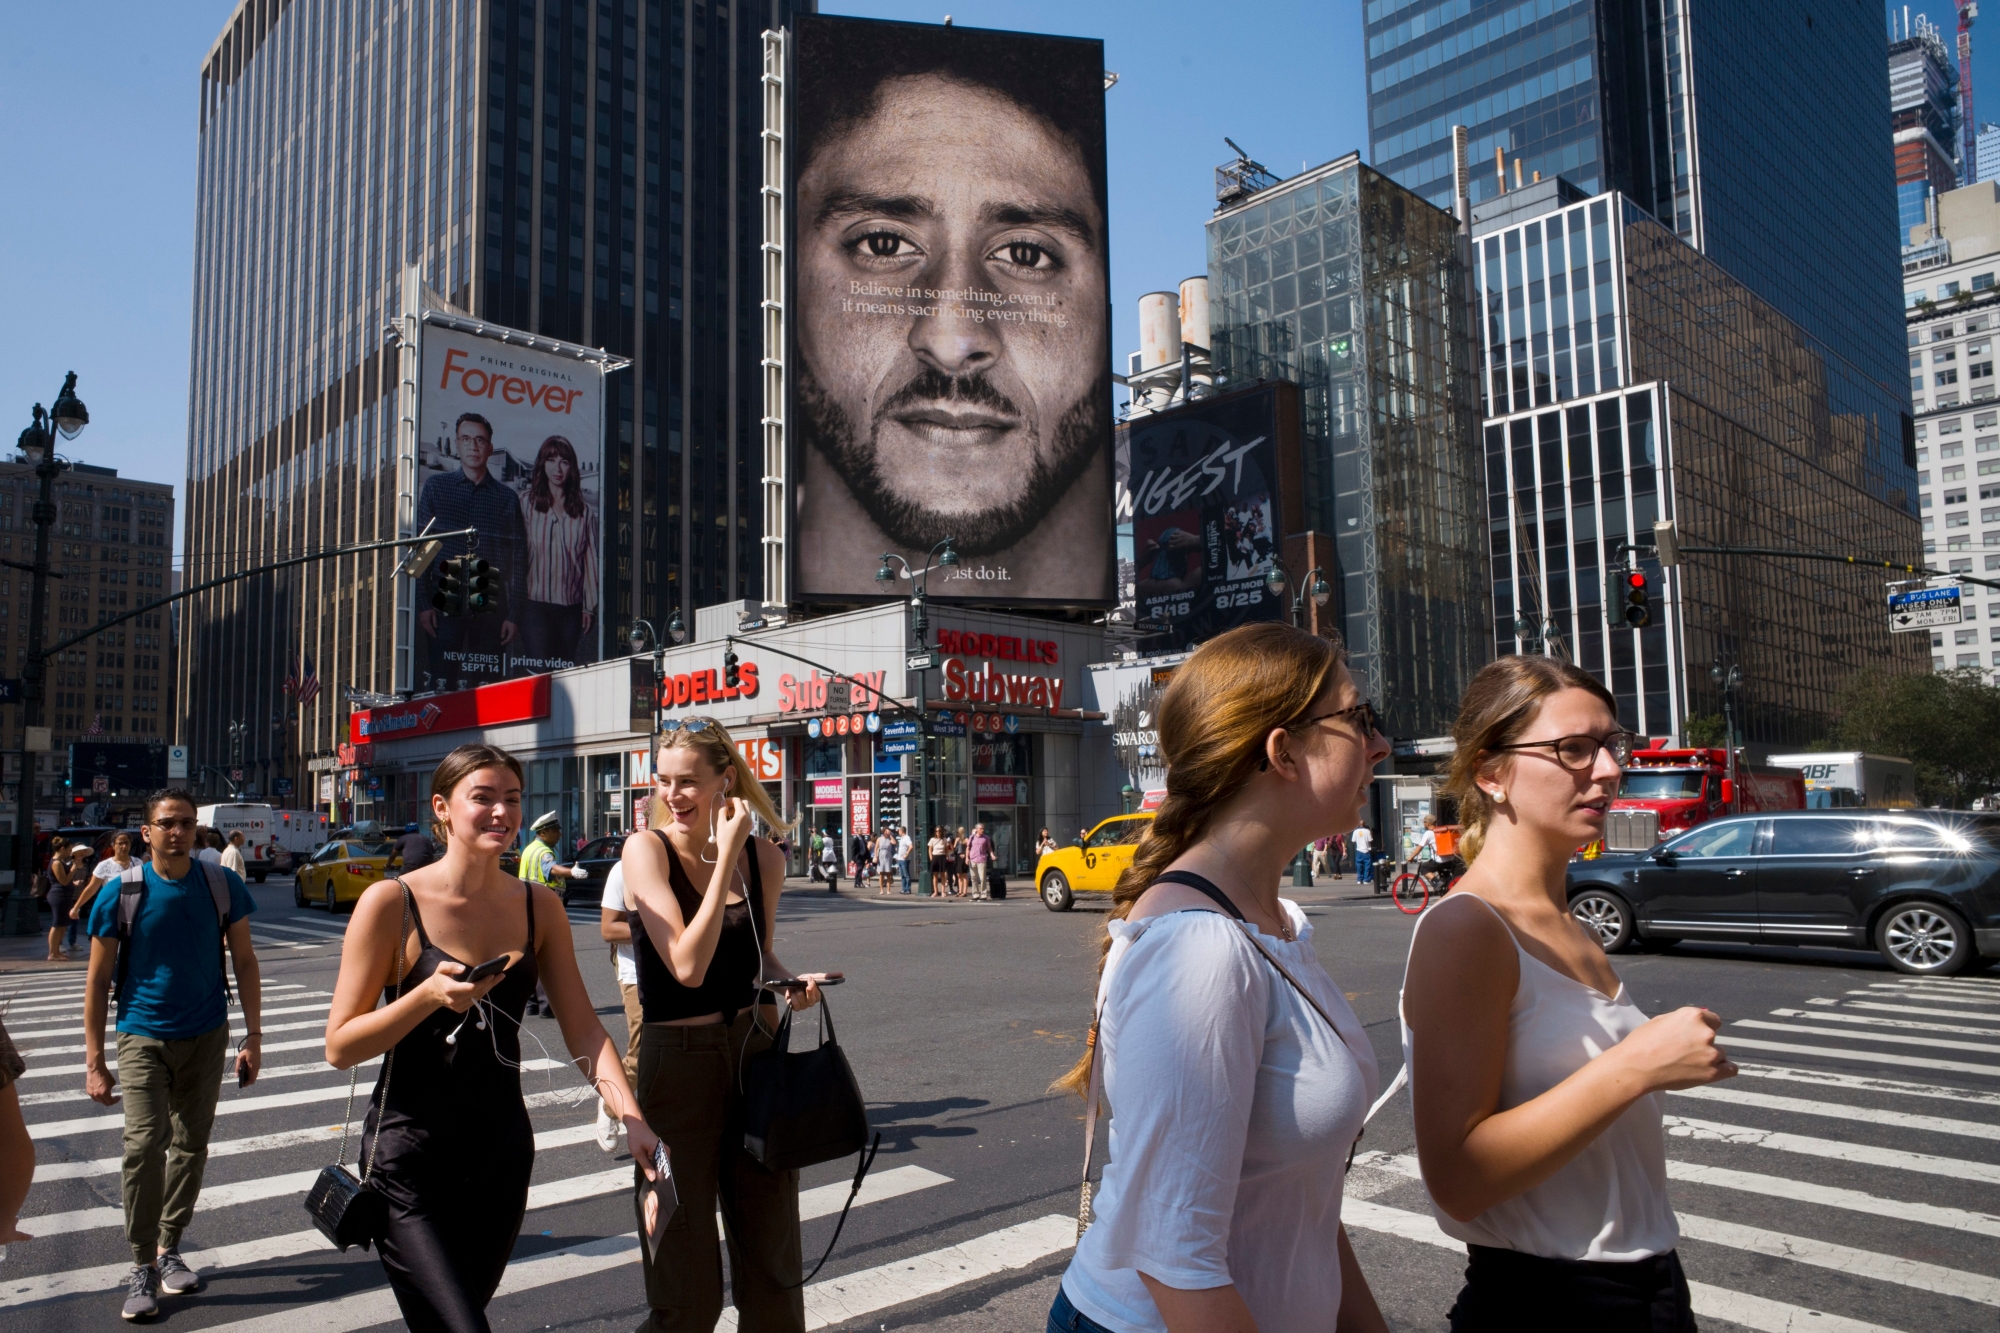 People walk by a Nike advertisement featuring Colin Kaepernick on display, Thursday, Sept. 6, 2018, in New York. Nike this week unveiled the deal with the former San Francisco 49ers quarterback, who's known for starting protests among NFL players over police brutality and racial inequality. (AP Photo/Mark Lennihan) APTOPIX Trump Nike